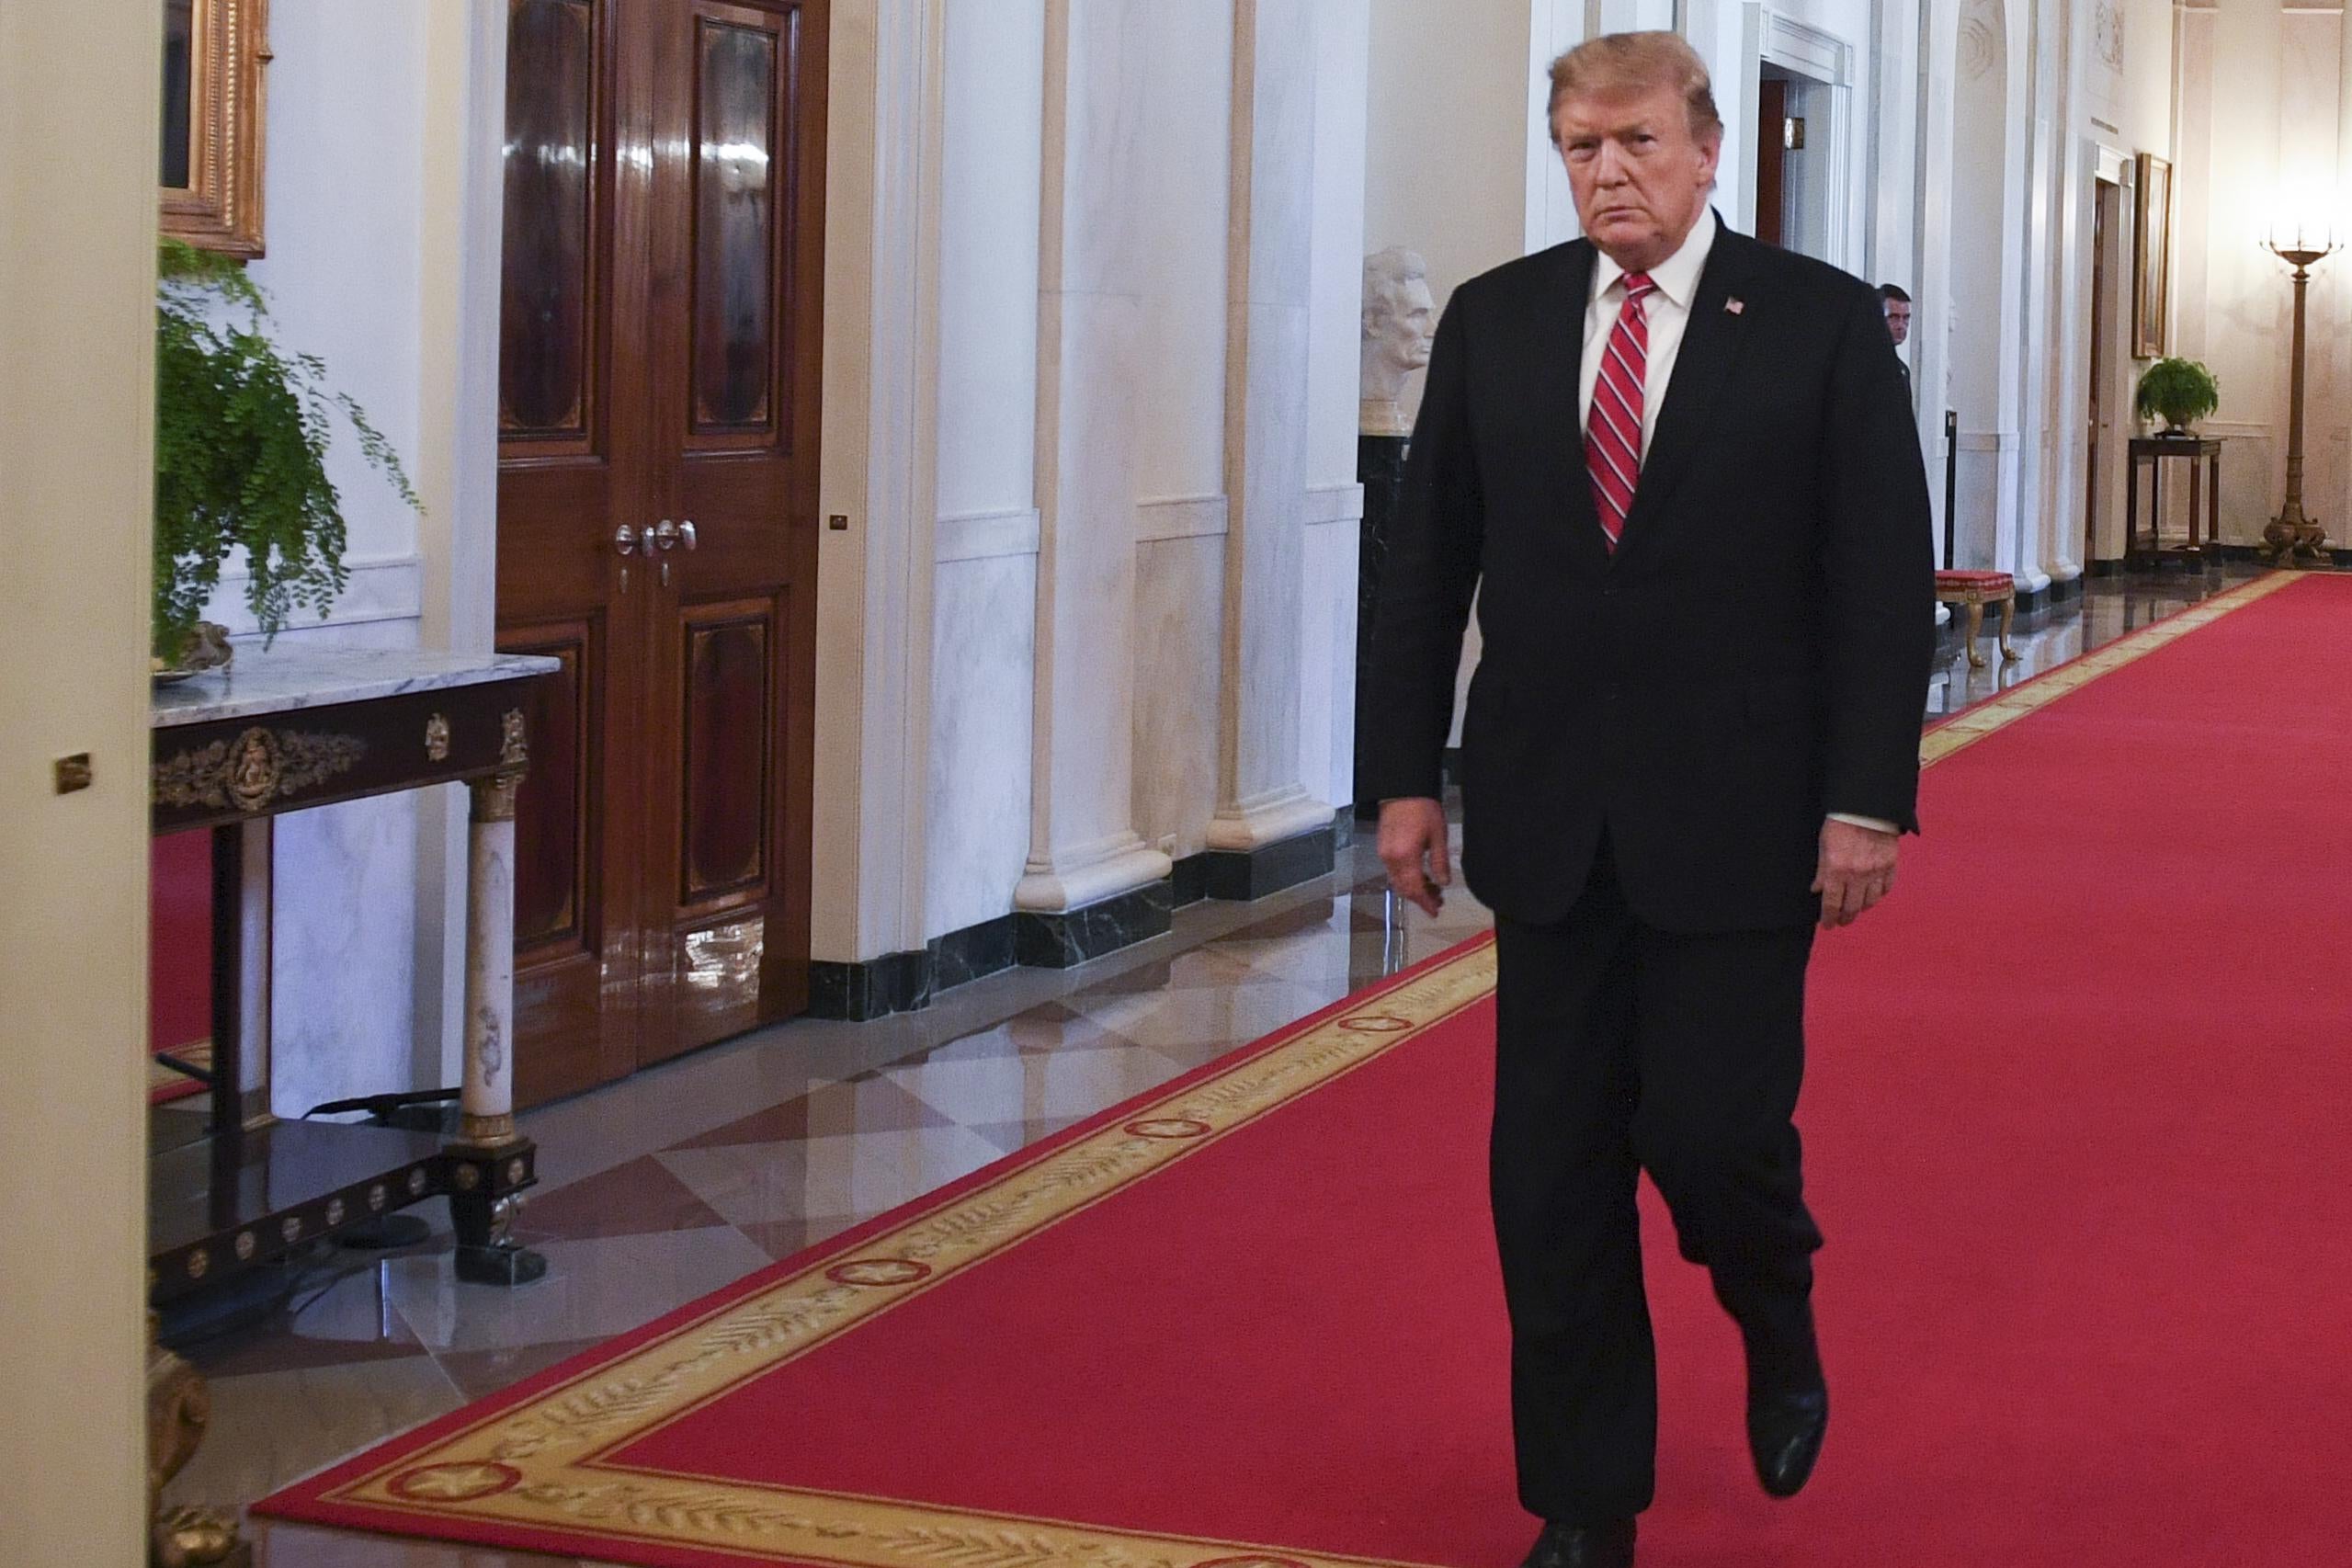 Trump walking down a red-carpeted hallway in the White House.